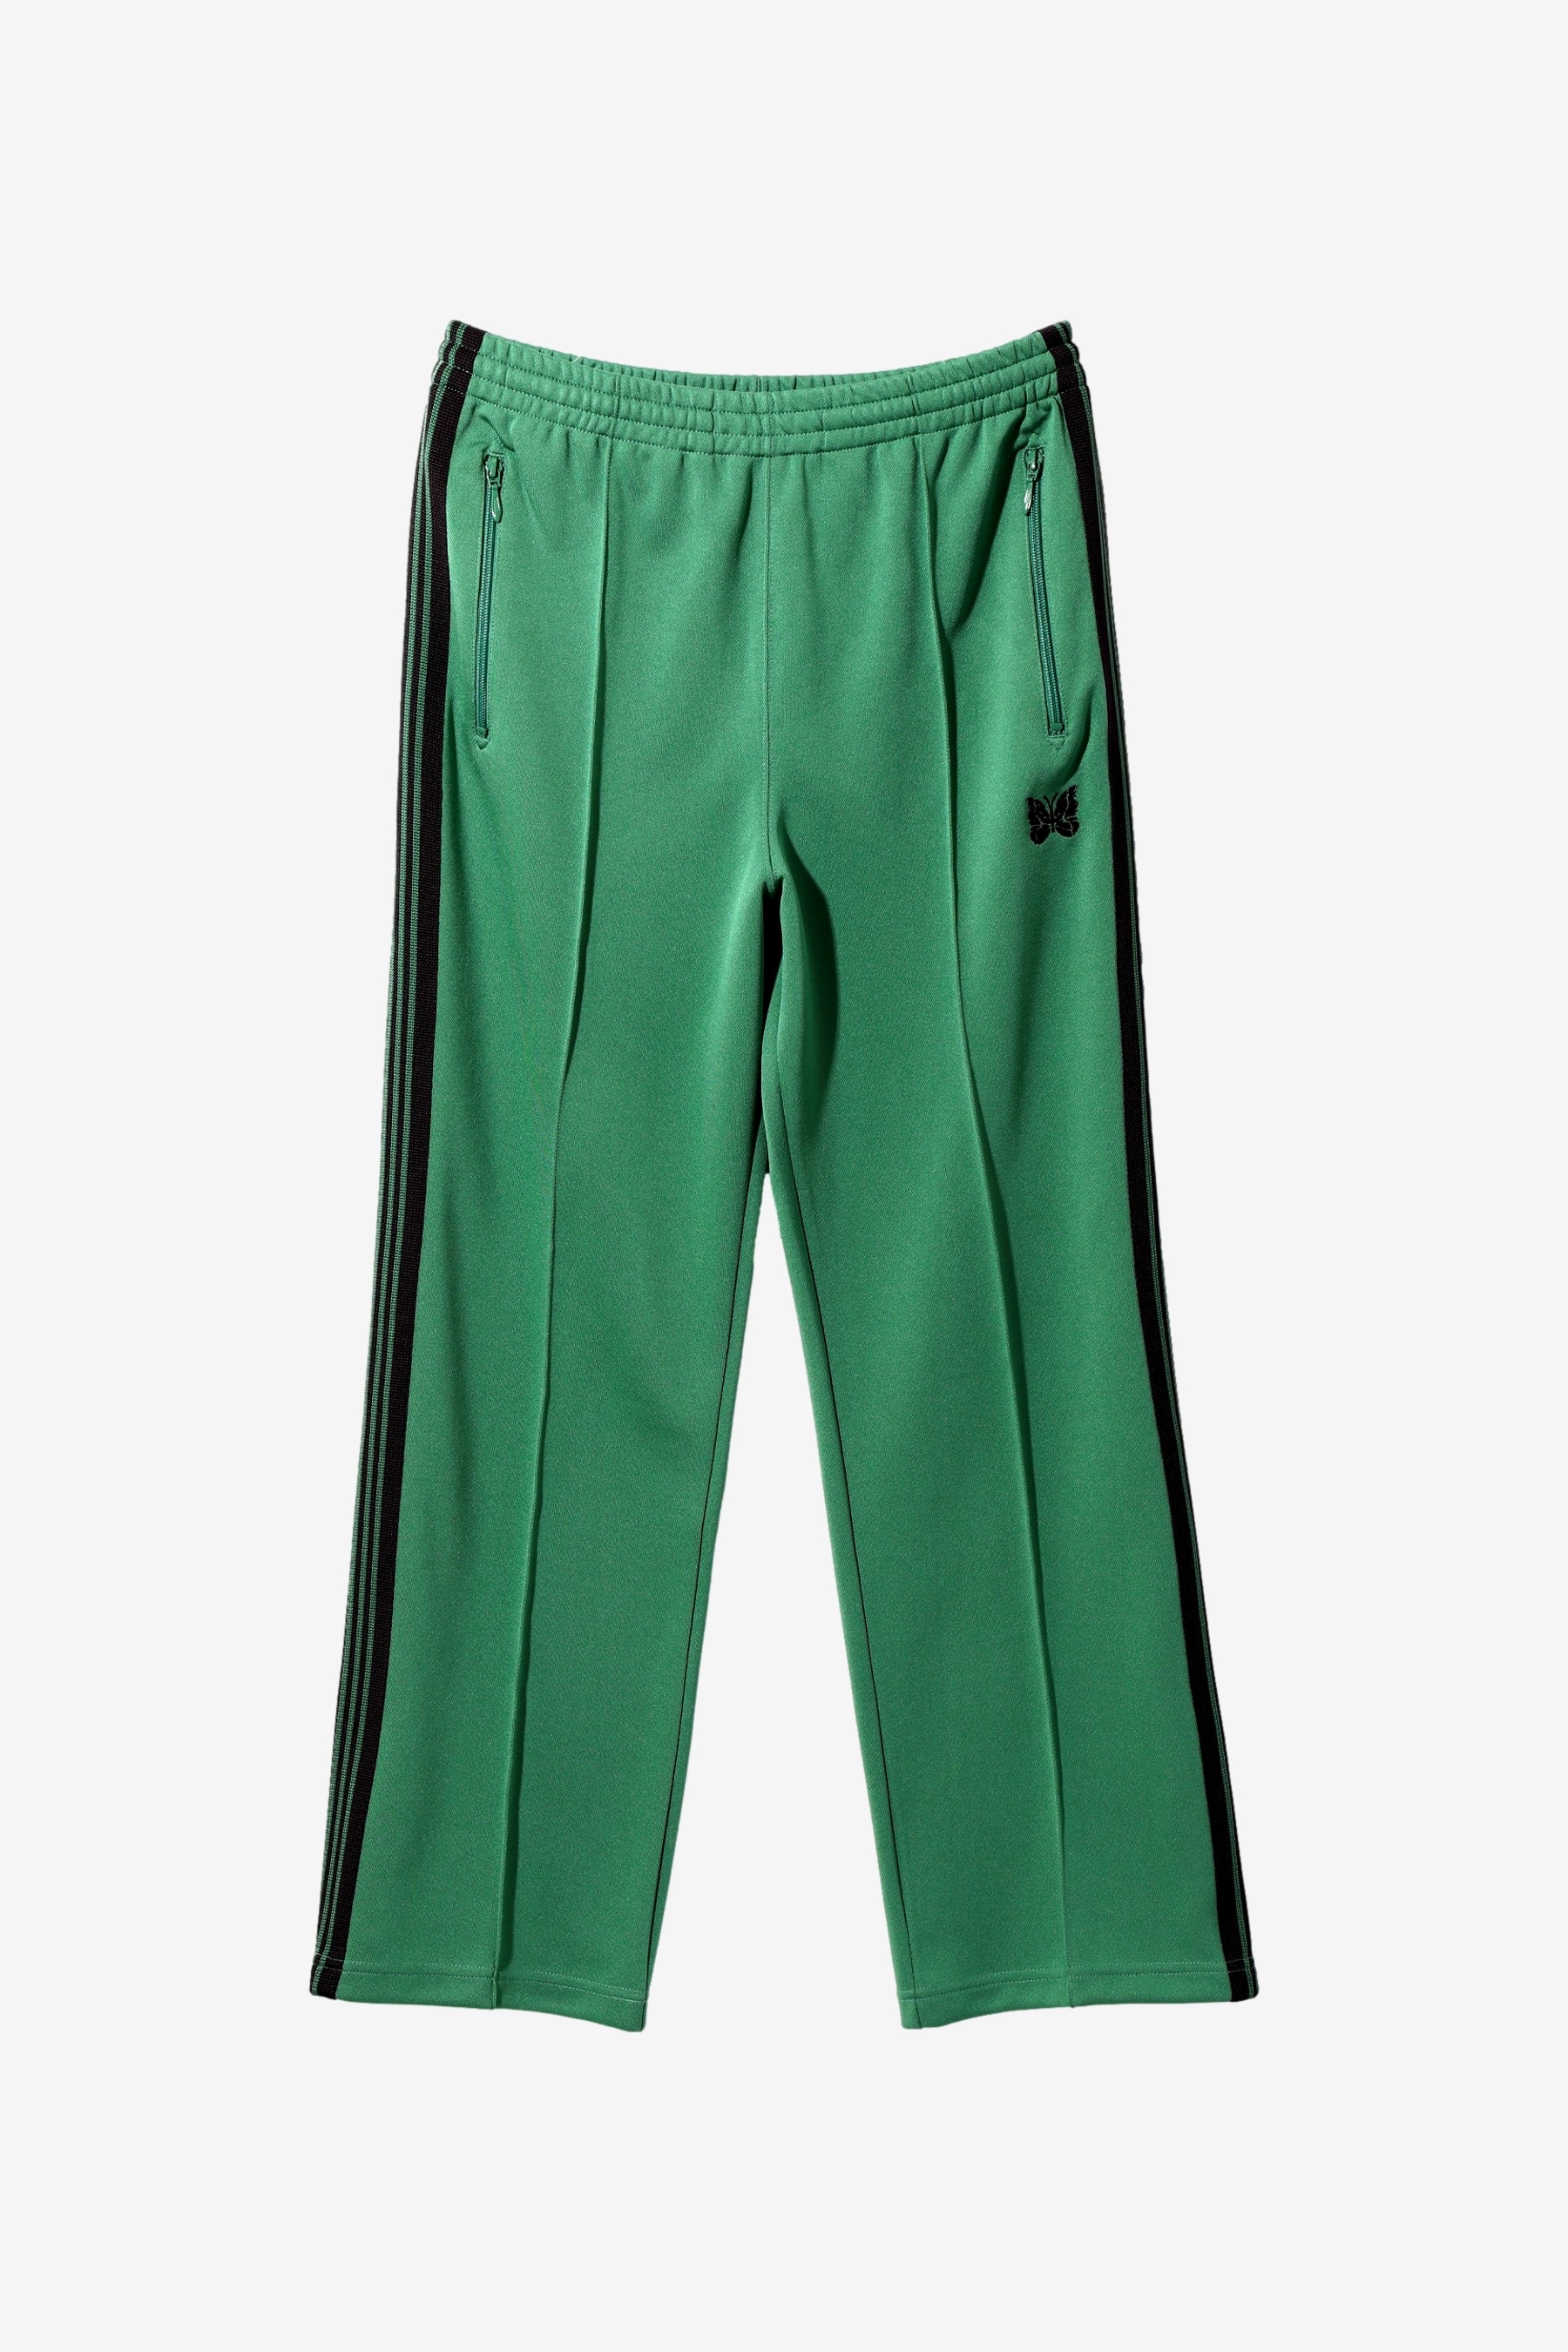 Track Pant Poly Smooth in Emerald - Needles | Afura Store